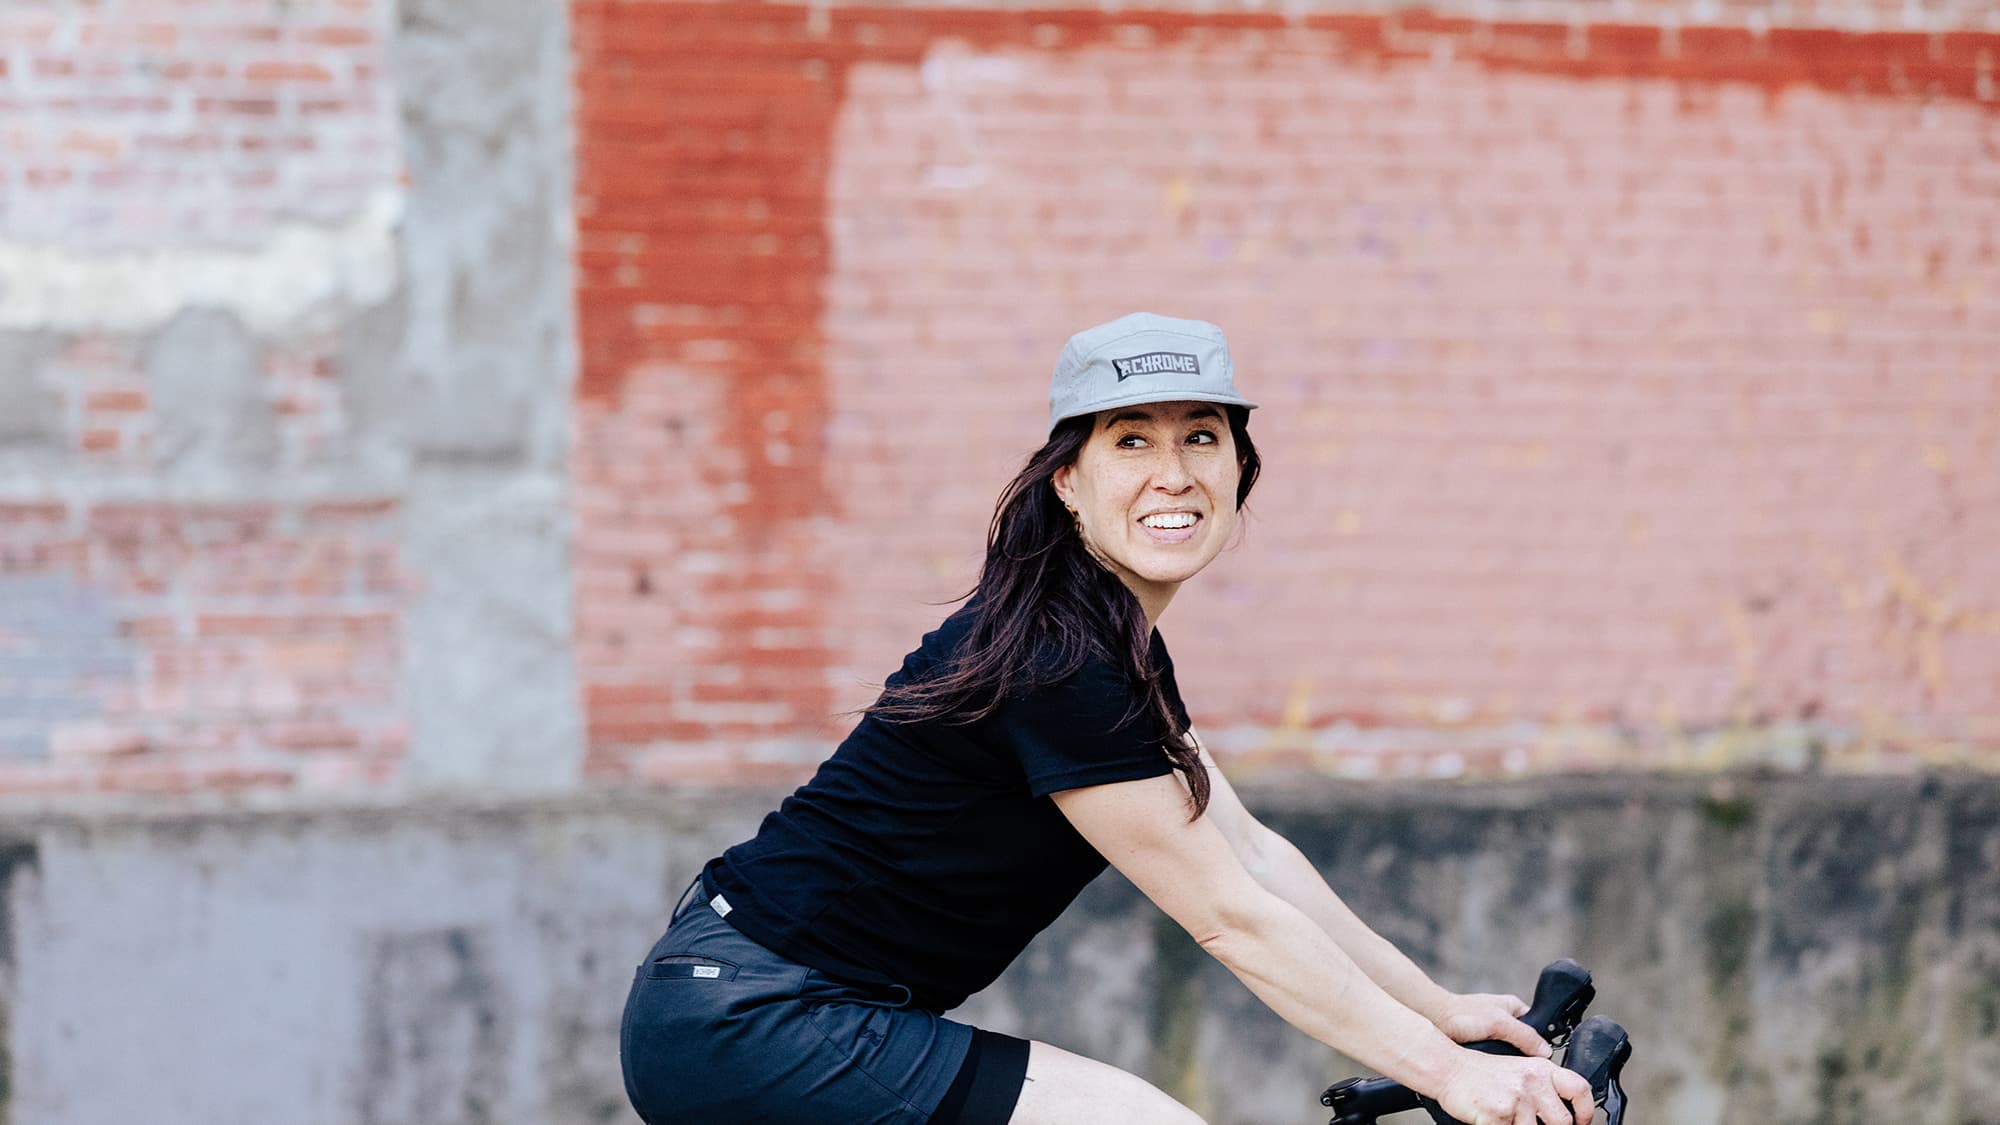 5-panel hat being worn by a woman riding a bike